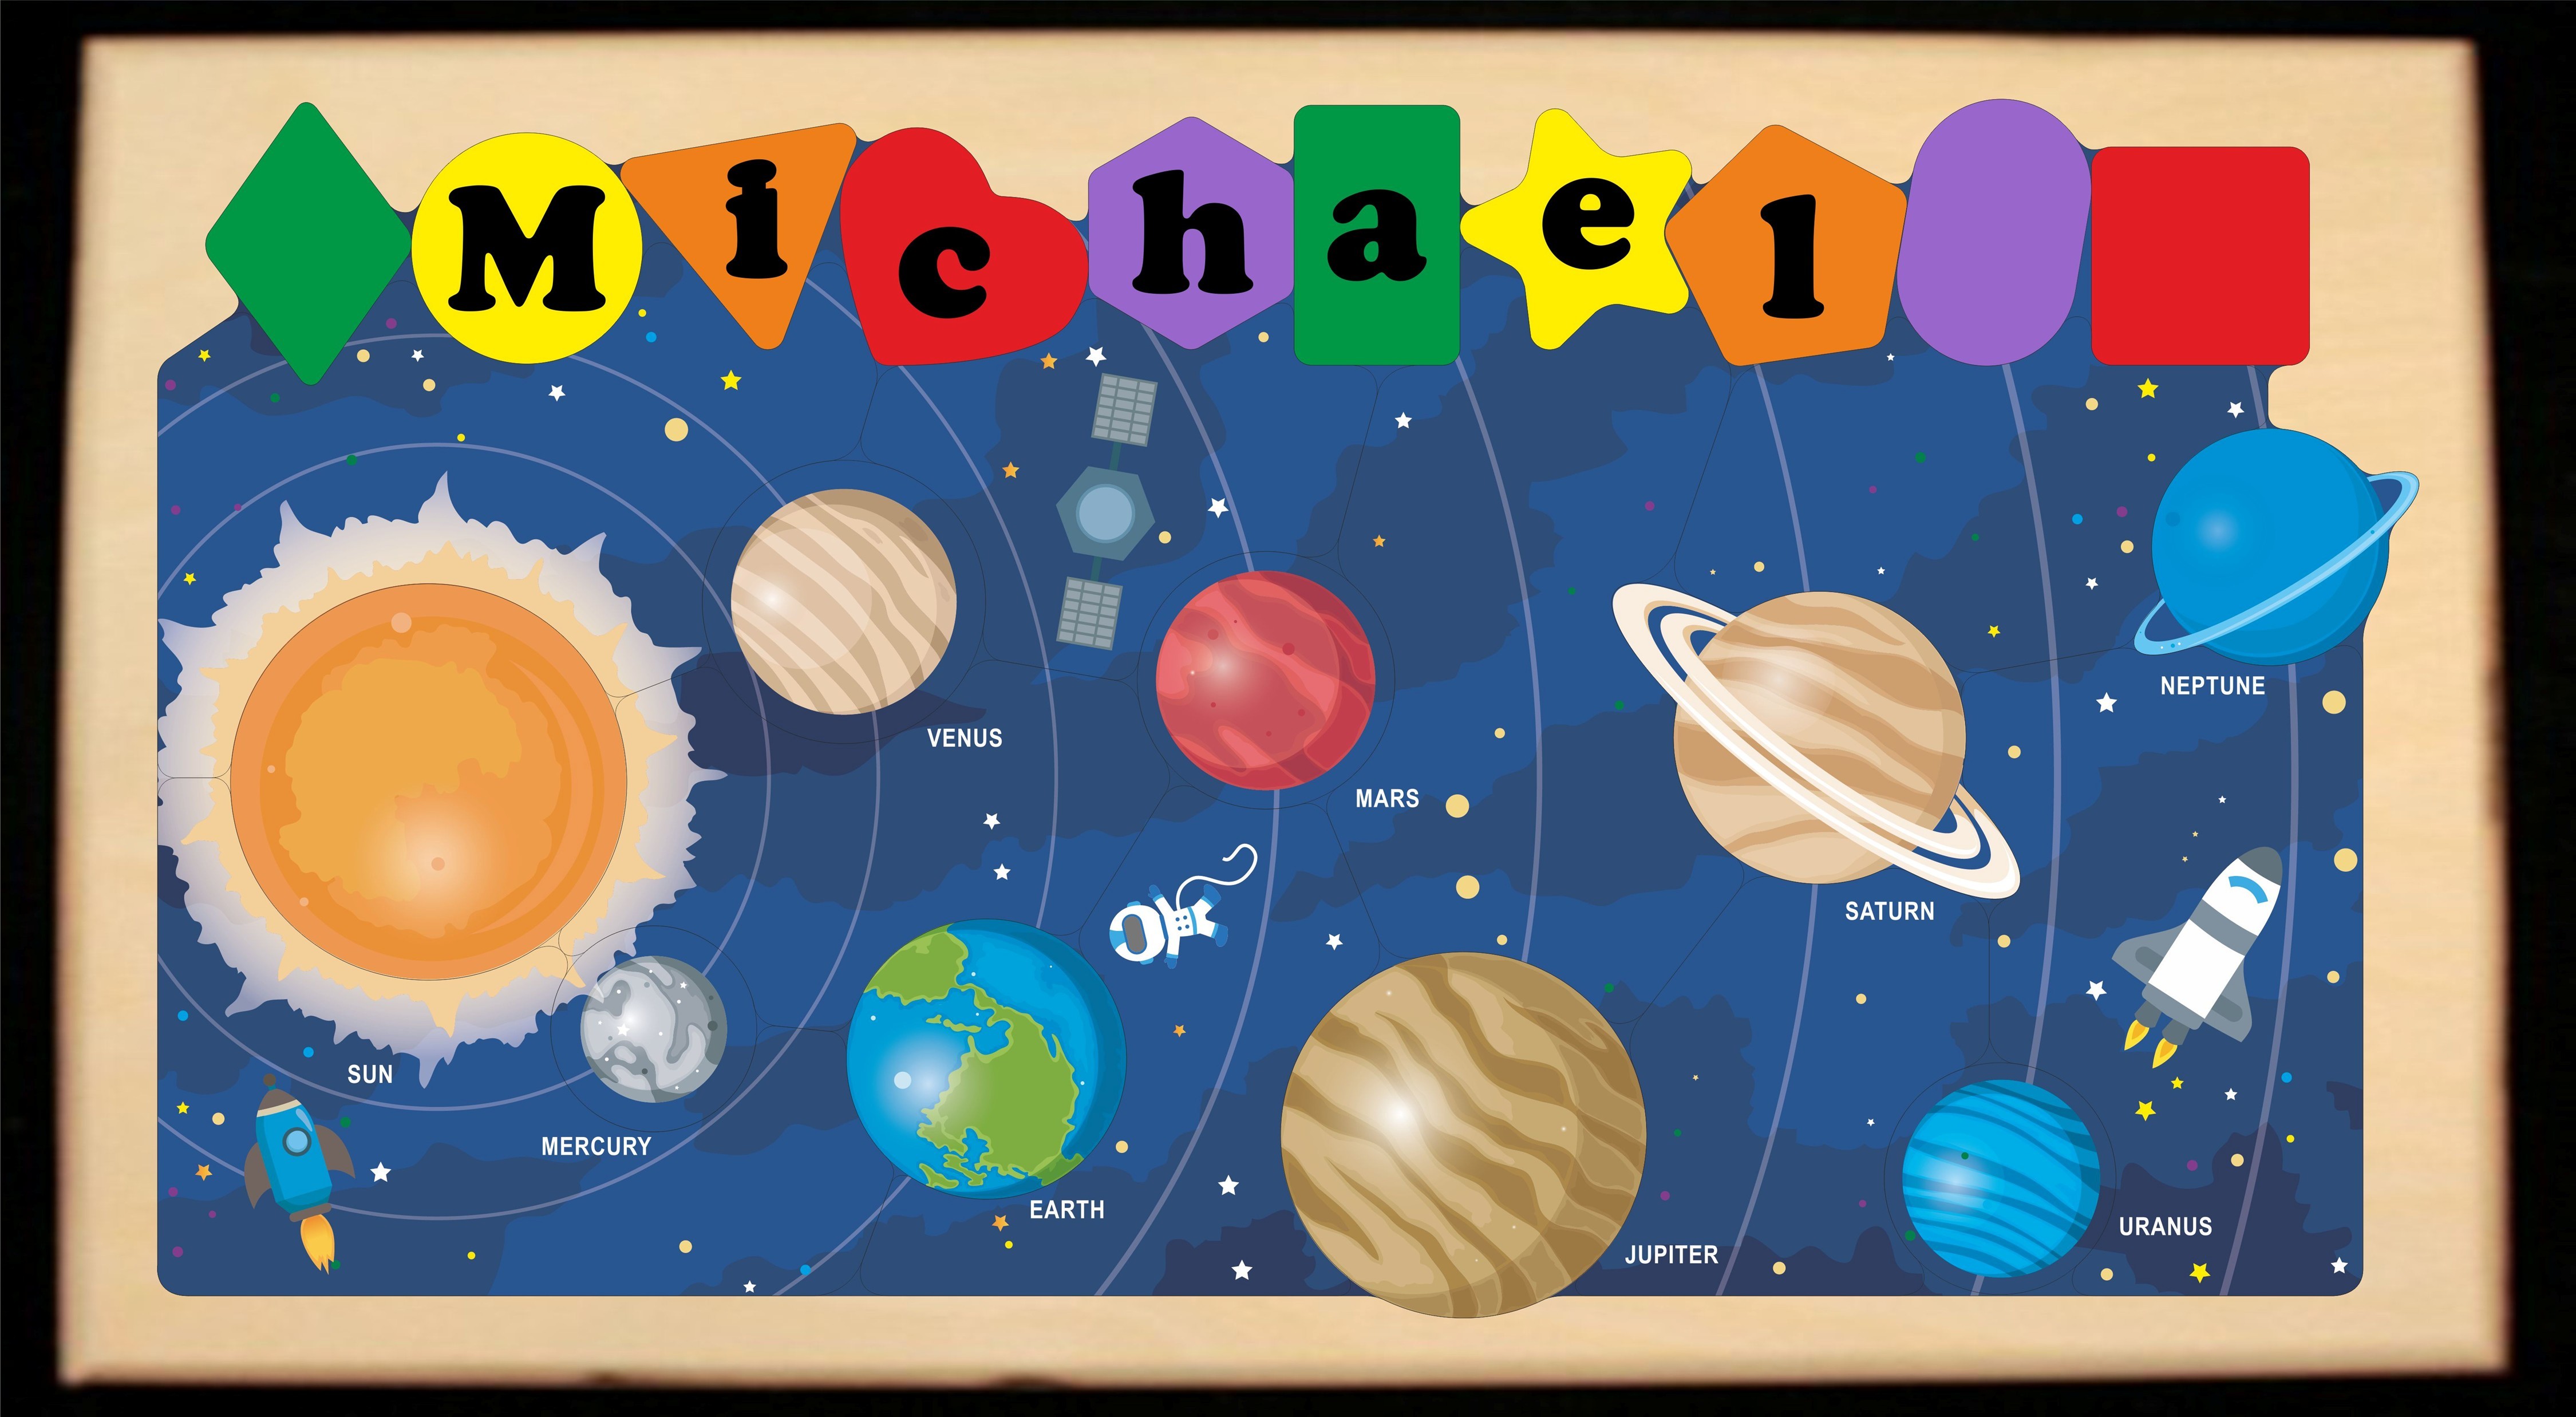 NEW ** 2021 ** PERSONALIZED NAME SOLAR SYSTEM THEME PUZZLE - (FREE SHIPPING)